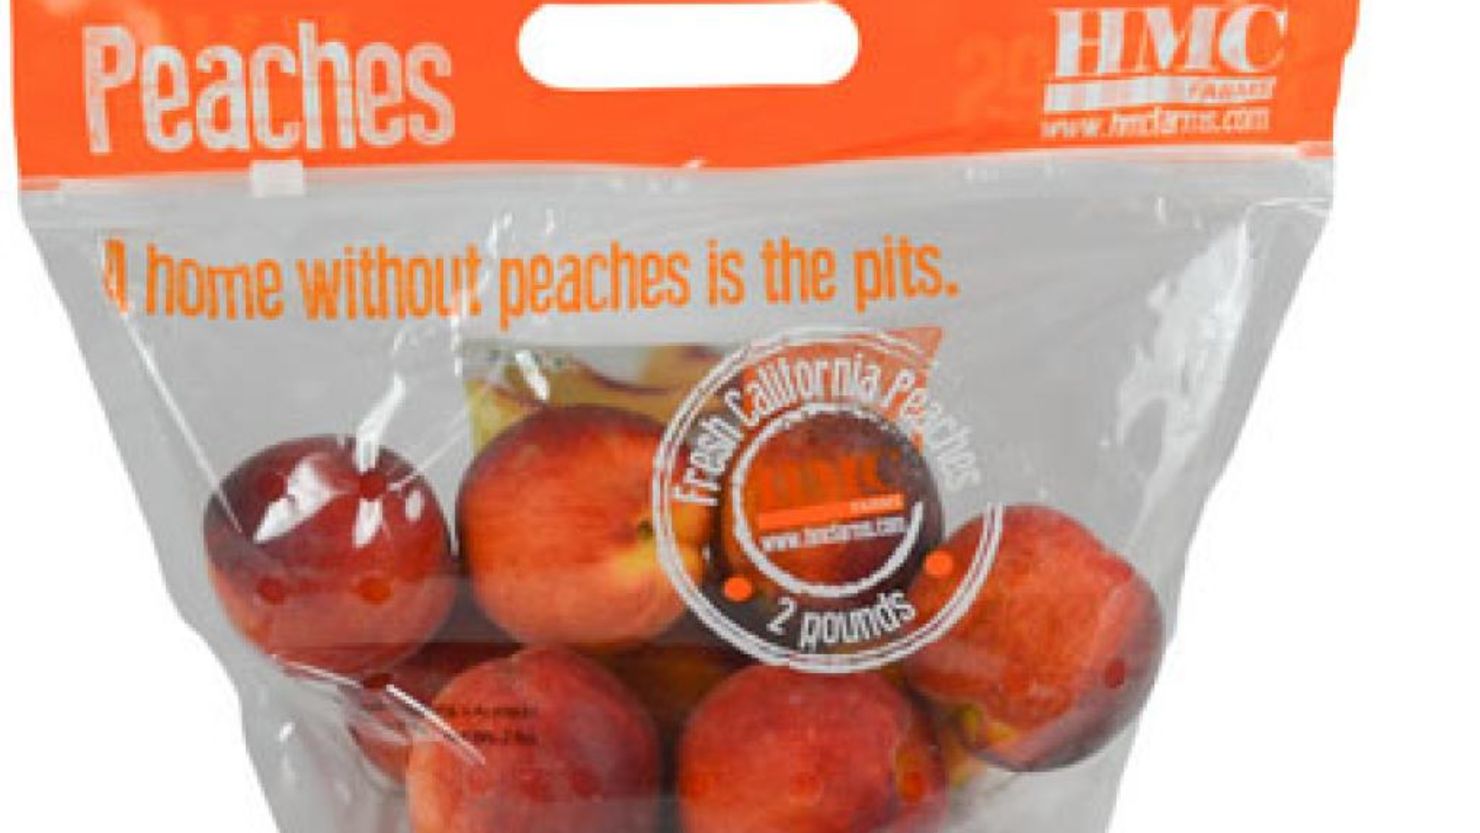 Peaches, plums and nectarines sold whole and in bags have been recalled in connection with a Listeria outbreak.